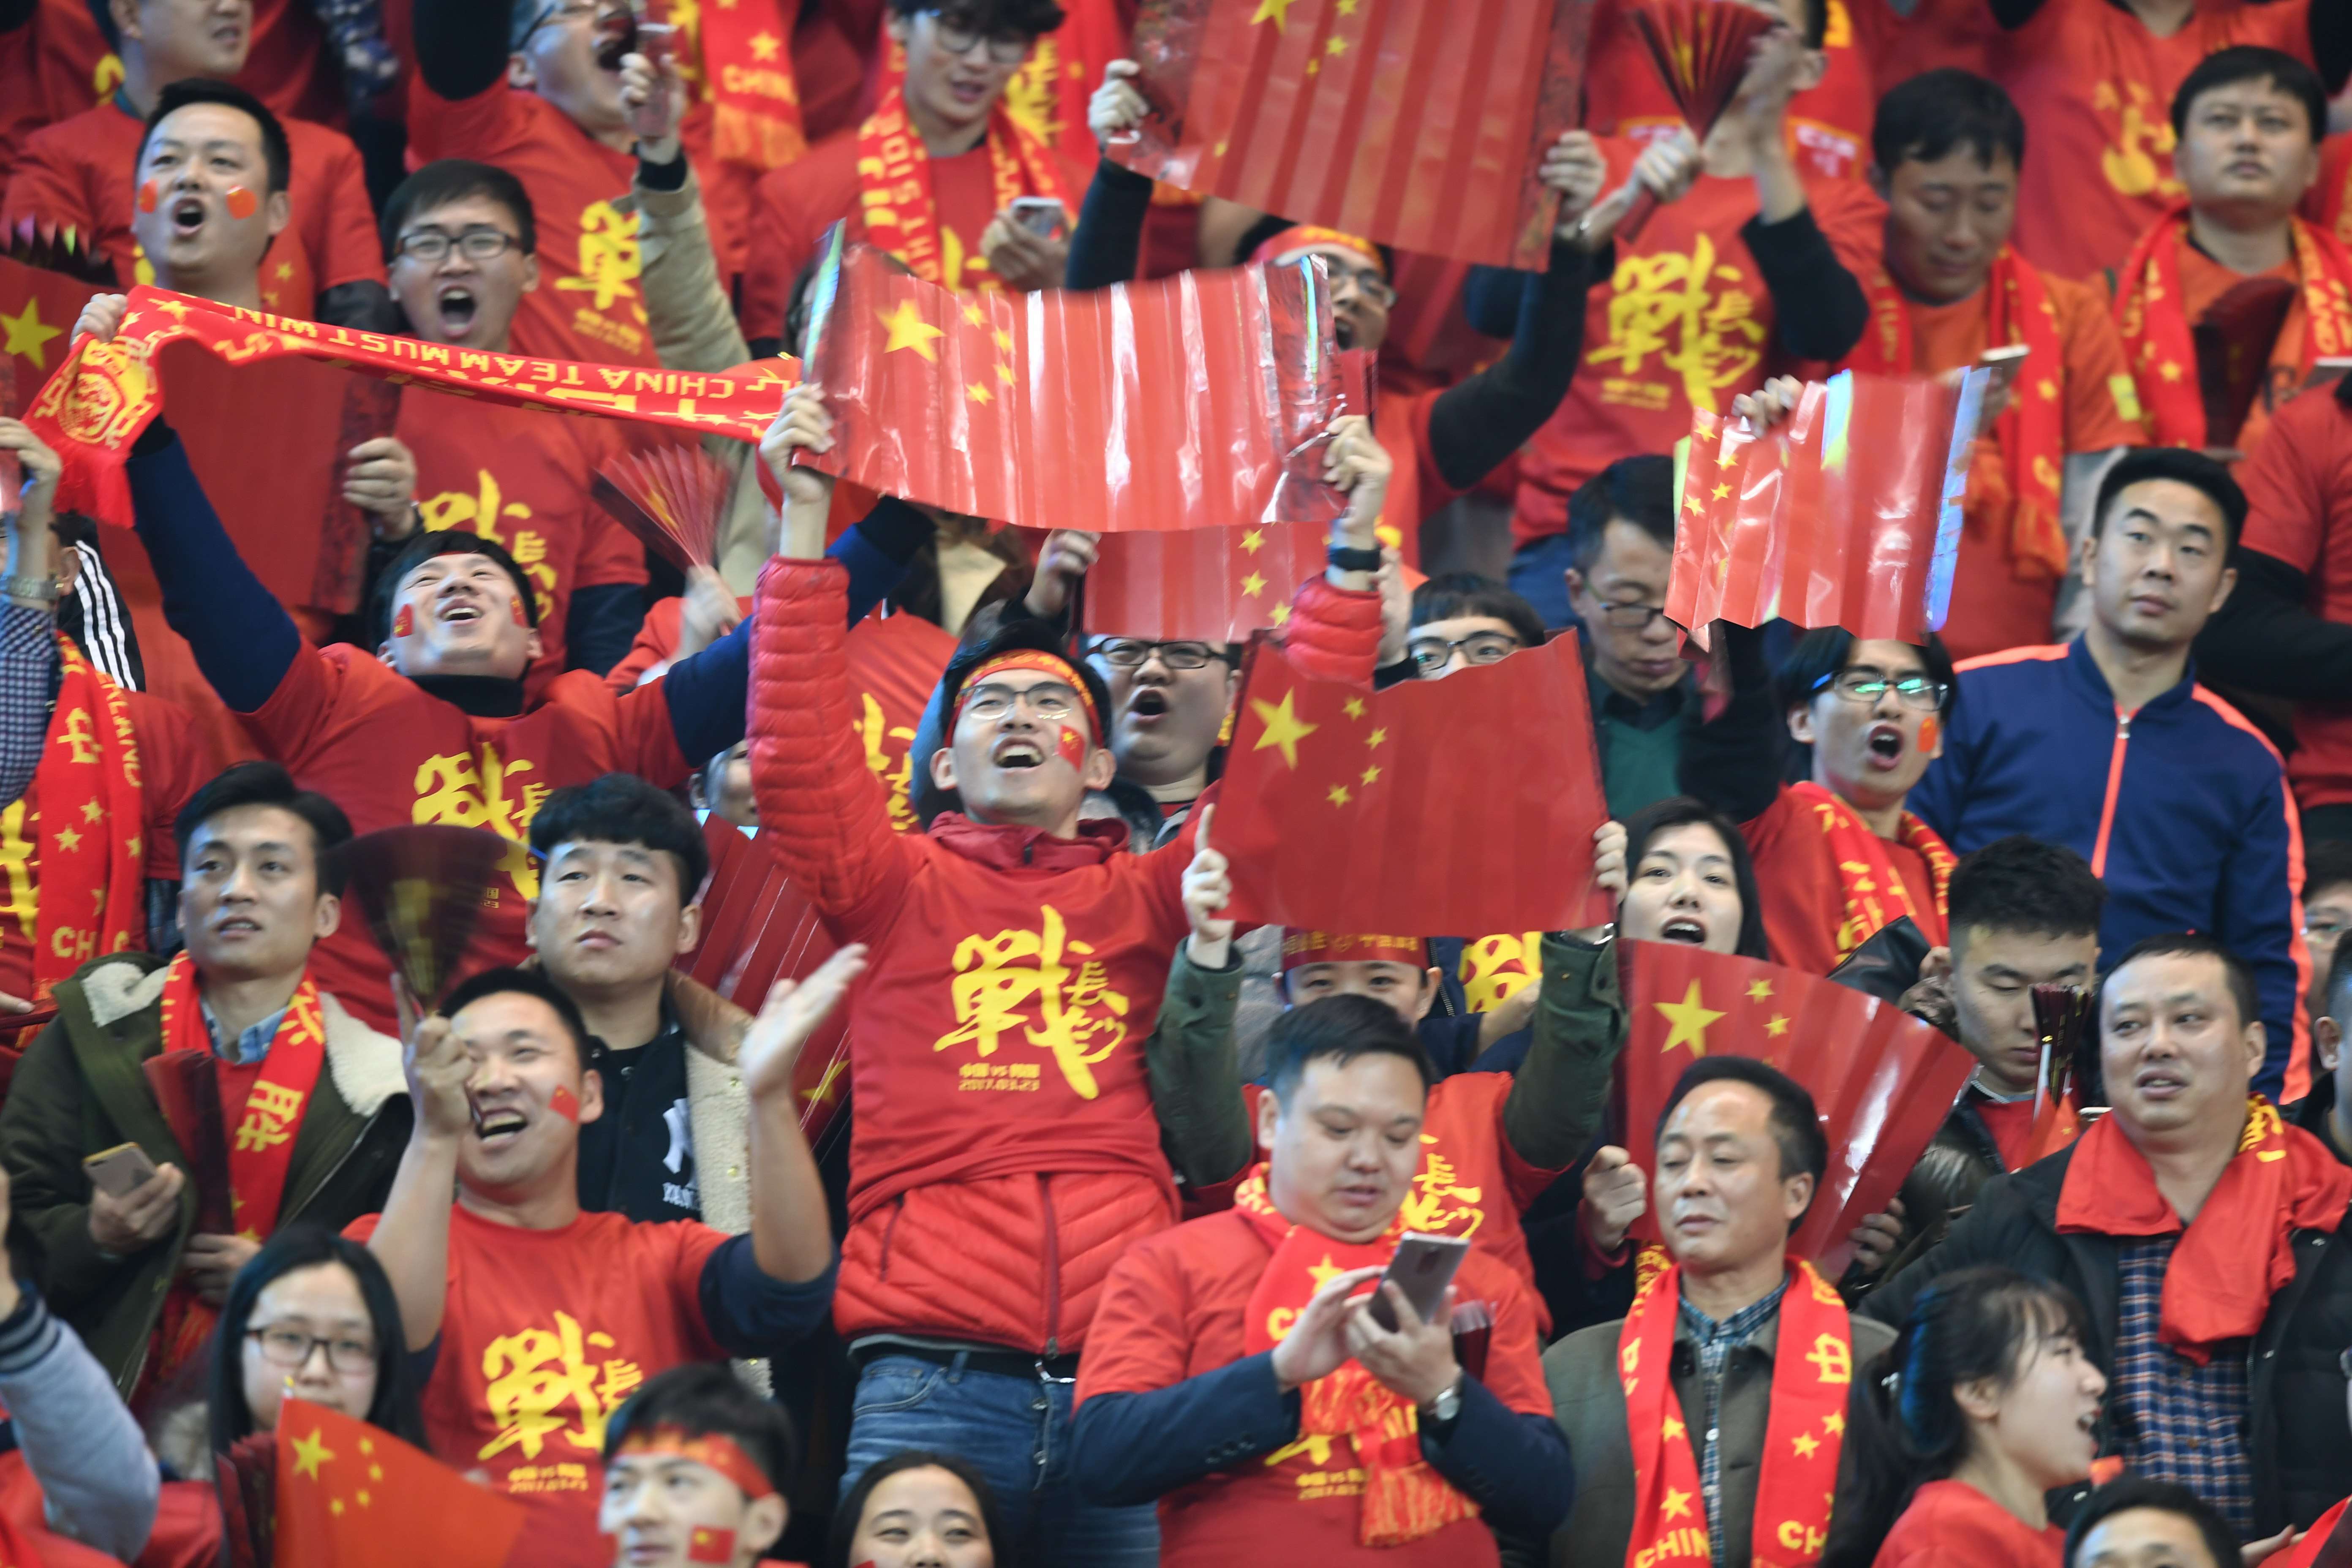 Chinese fans cheer on their team in Changsha. Photo: EPA